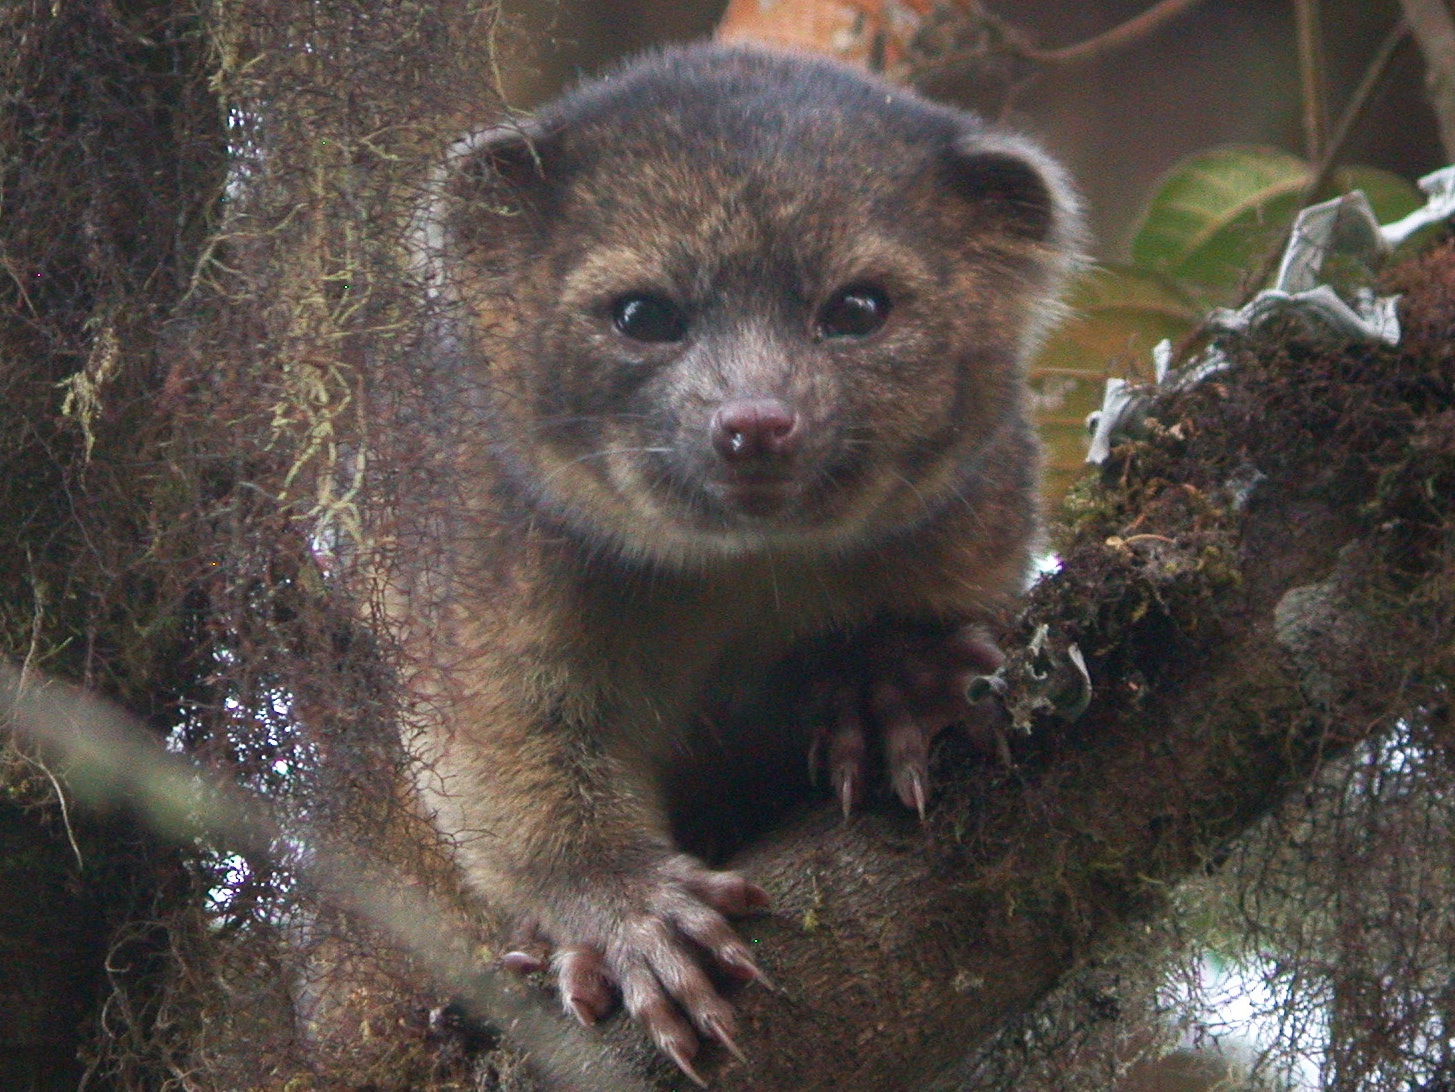 Cutest new animal' discovered: It's an olinguito!